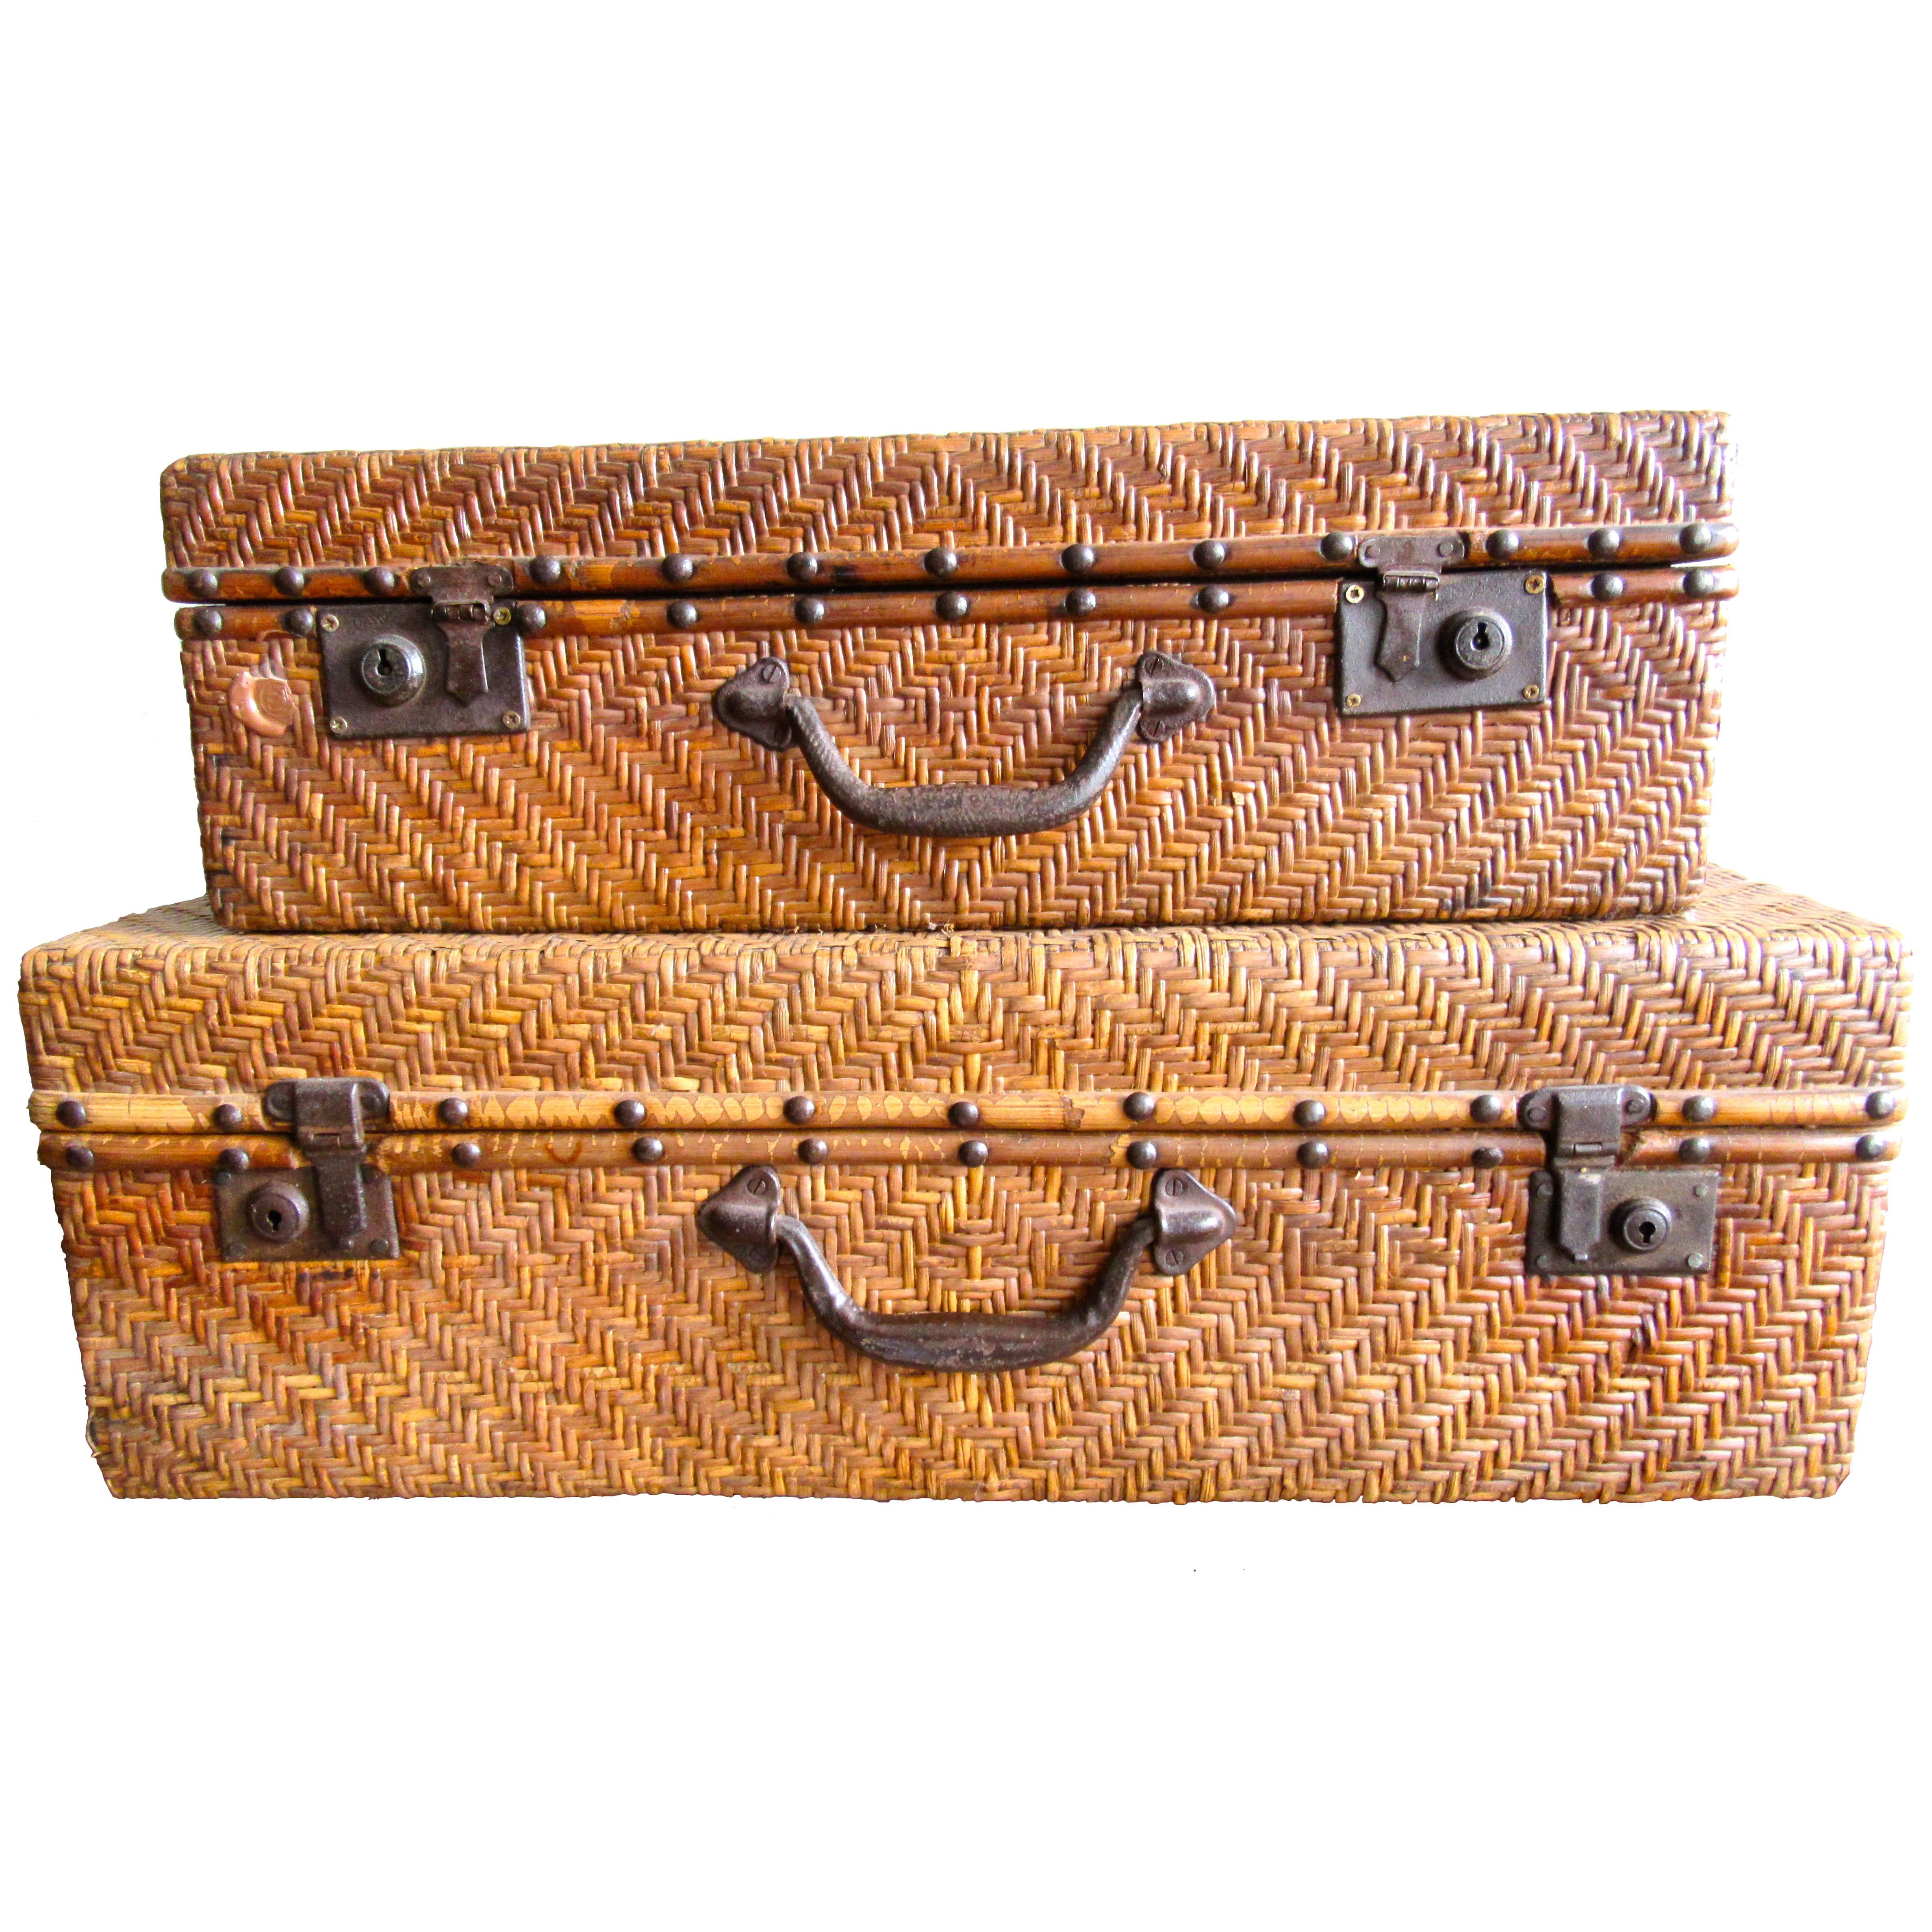 Vintage Chinese Rattan Luggage For Sale